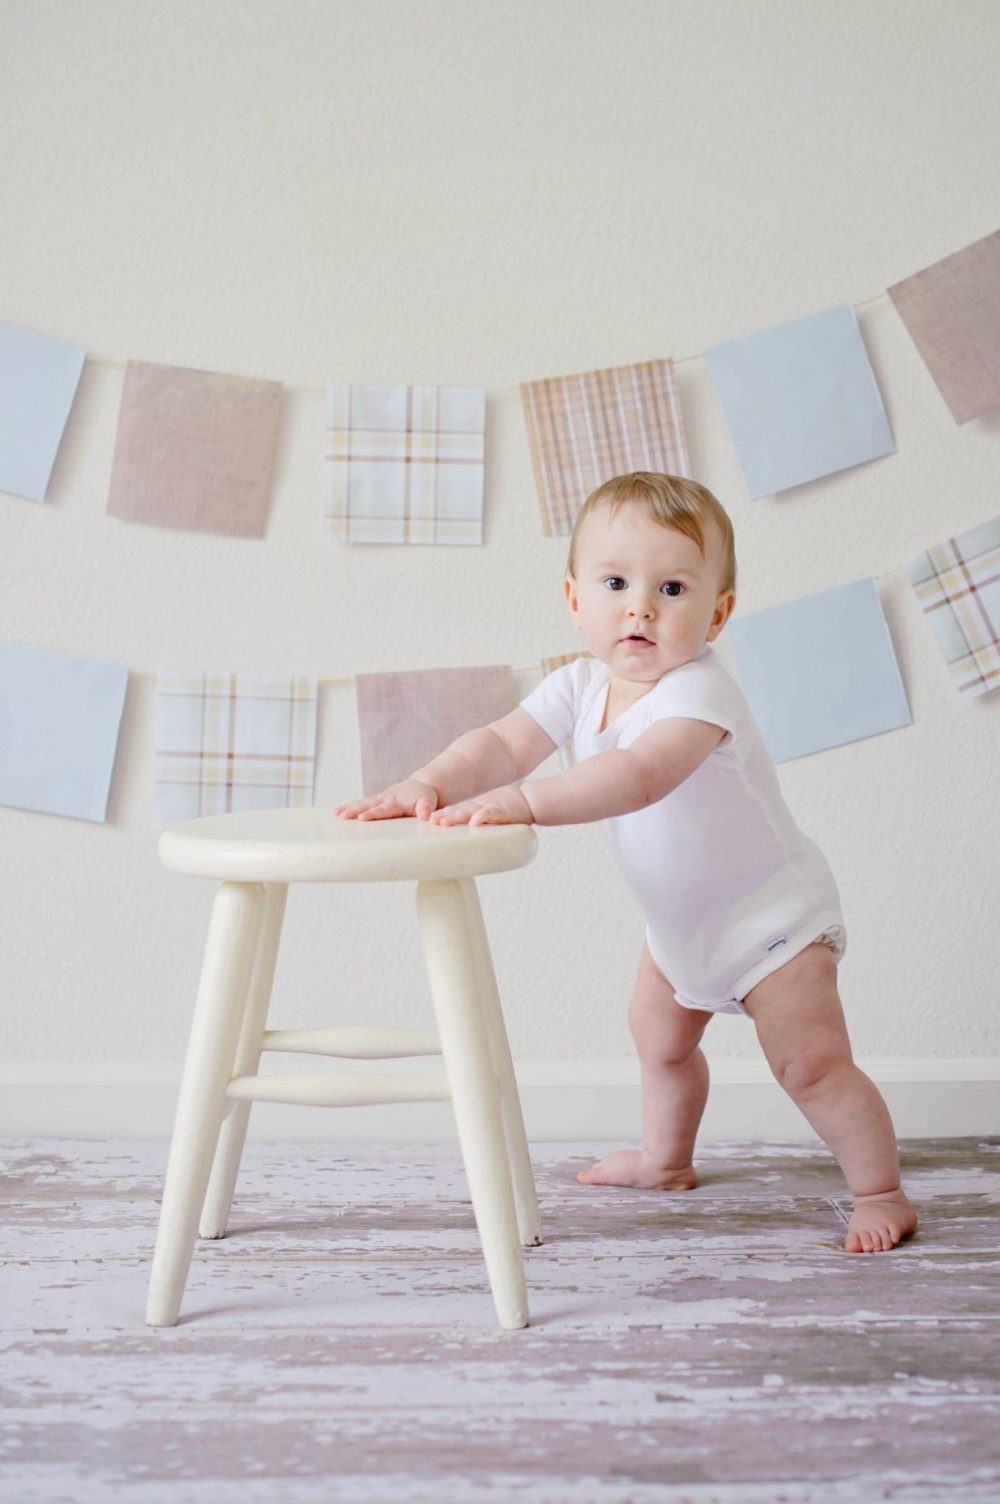 10 of the Best Baby Shower Gifts